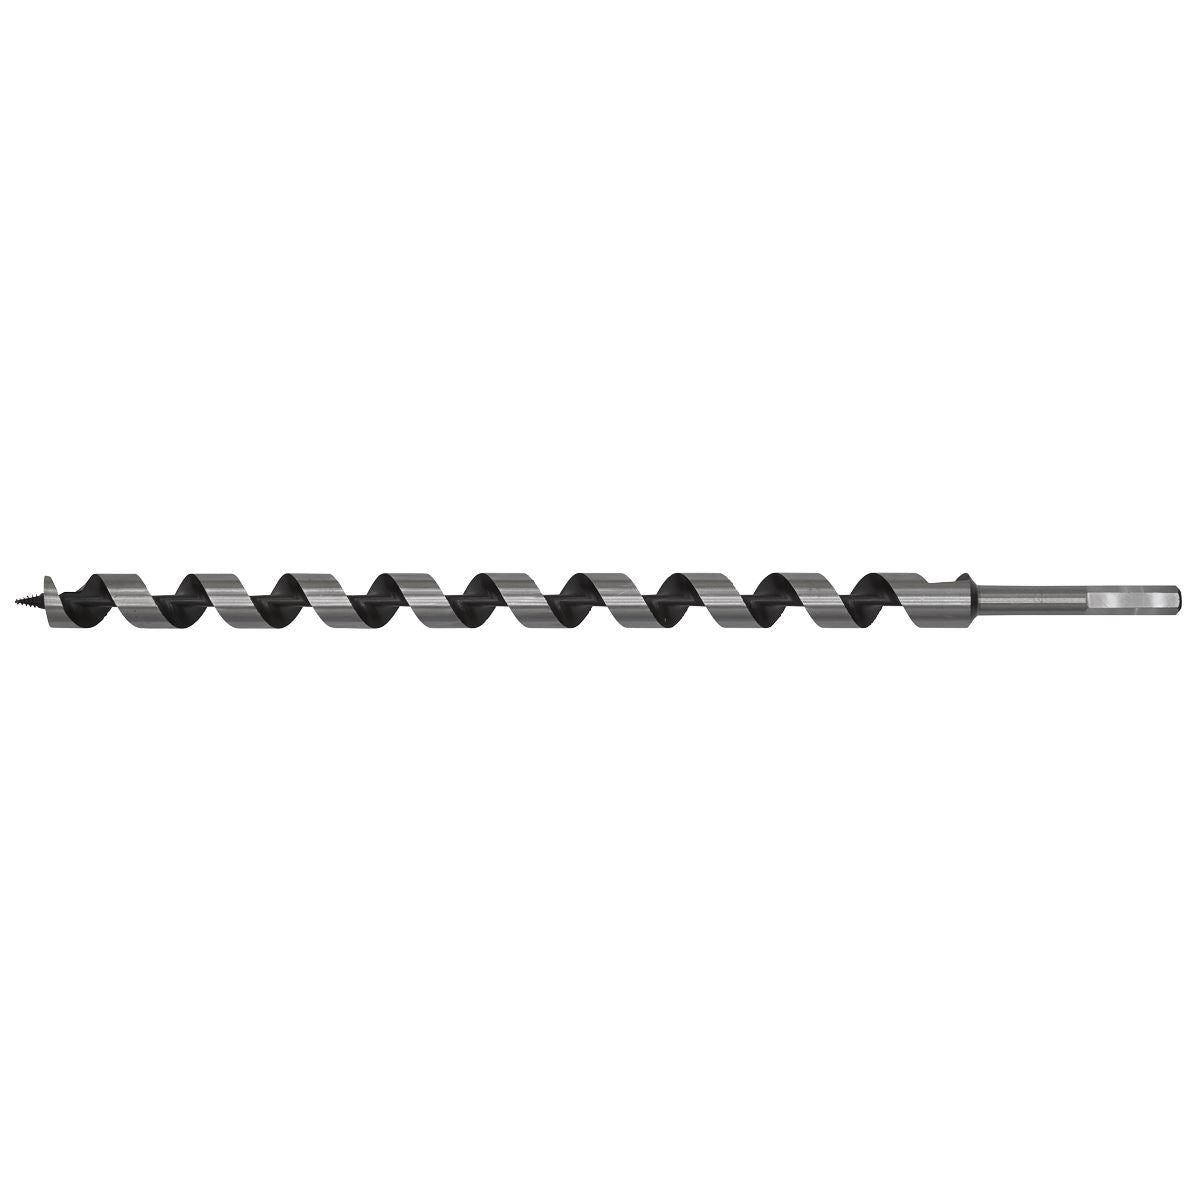 Worksafe by Sealey Auger Wood Drill Bit 22mm x 460mm